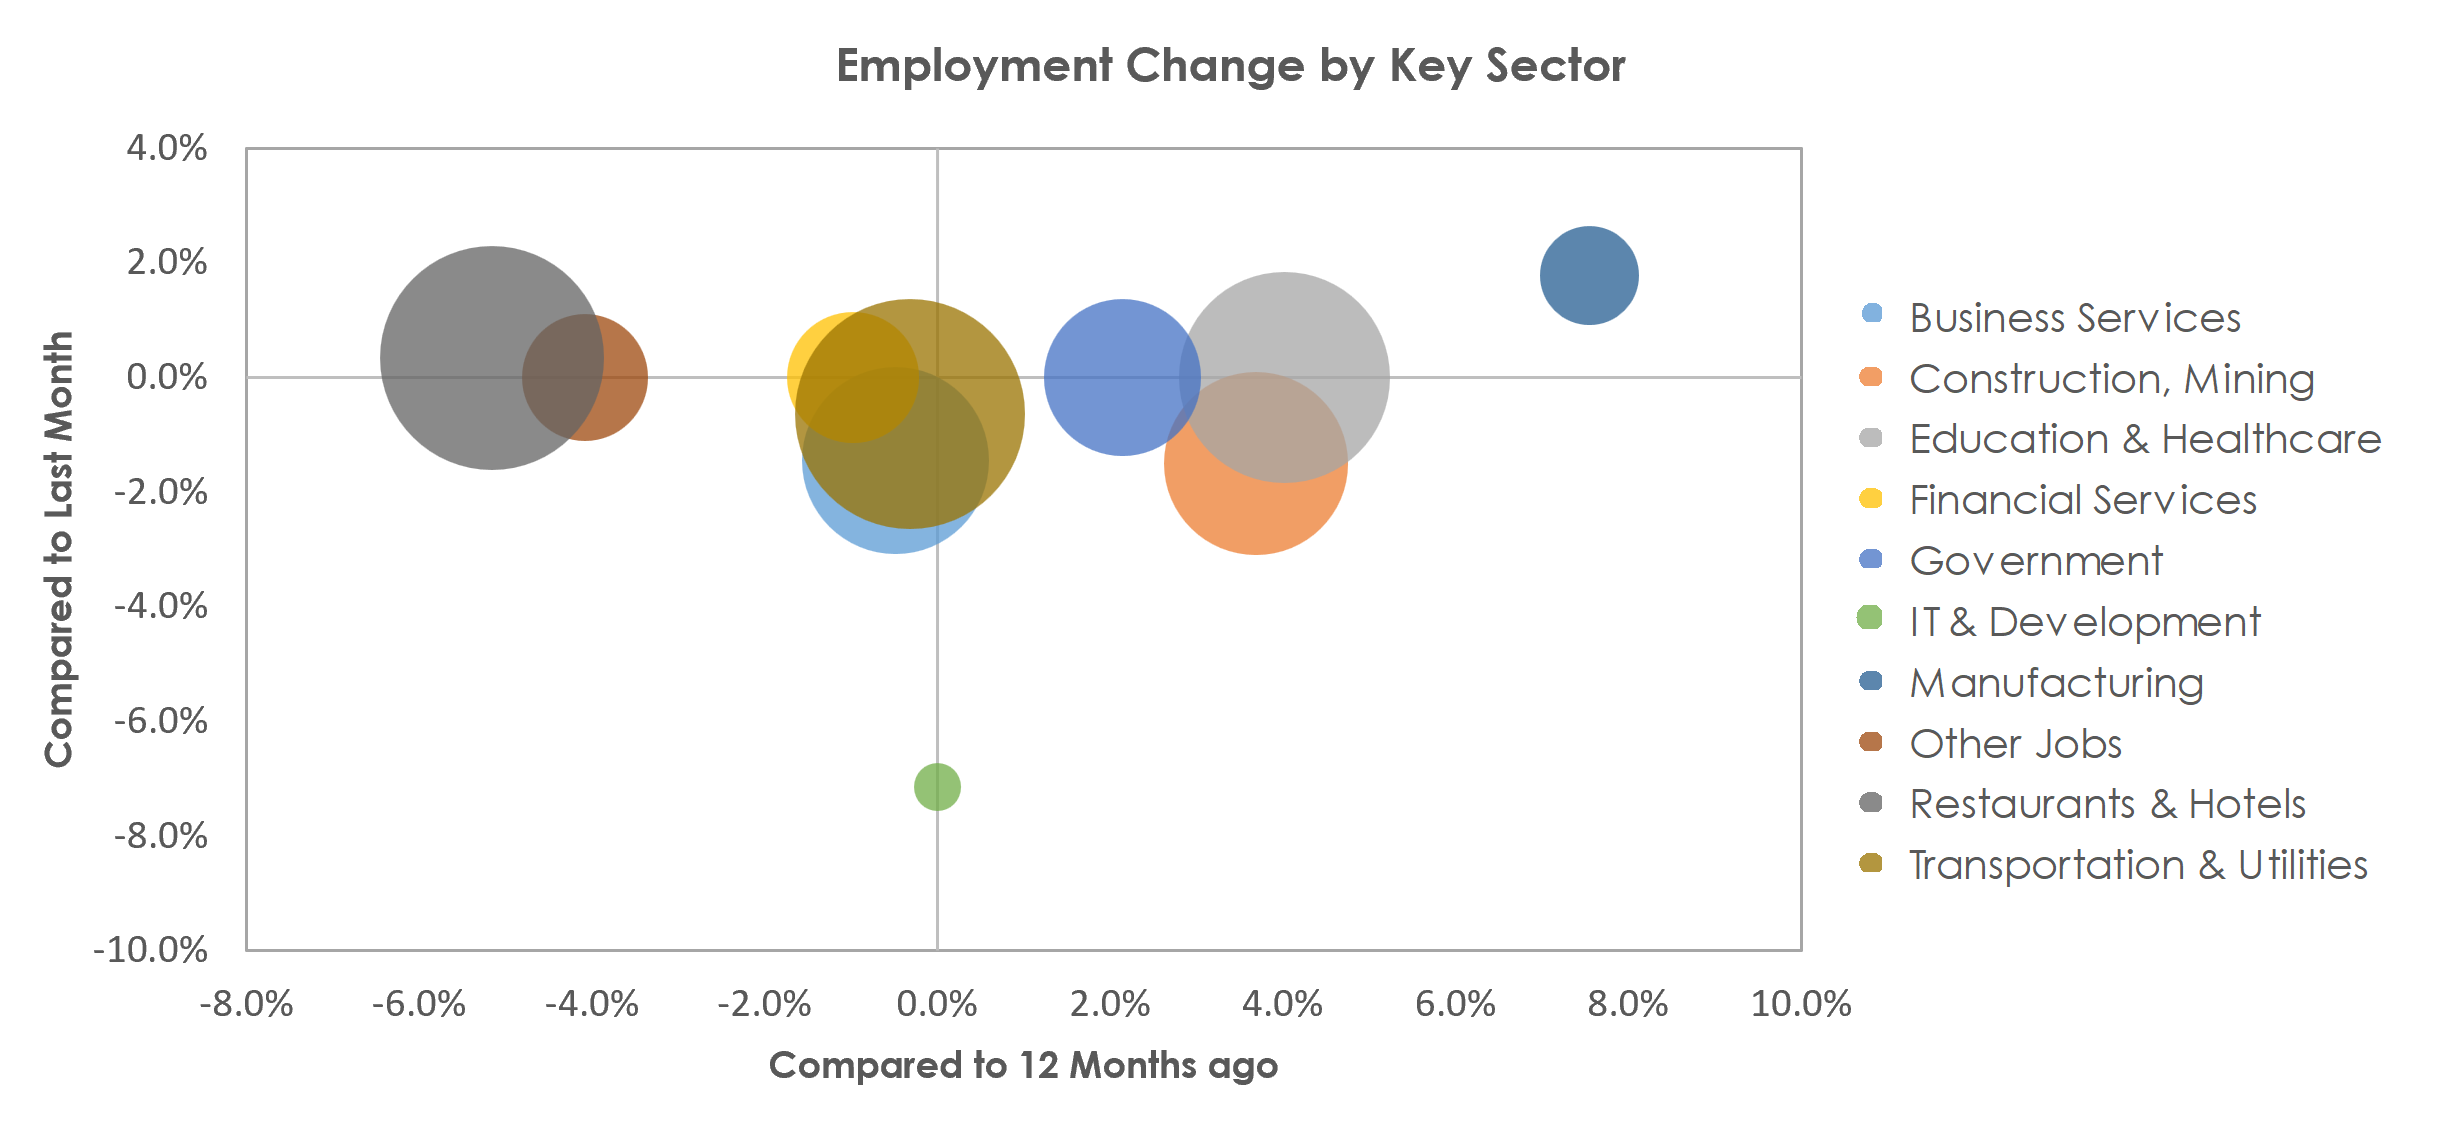 Naples-Immokalee-Marco Island, FL Unemployment by Industry April 2023